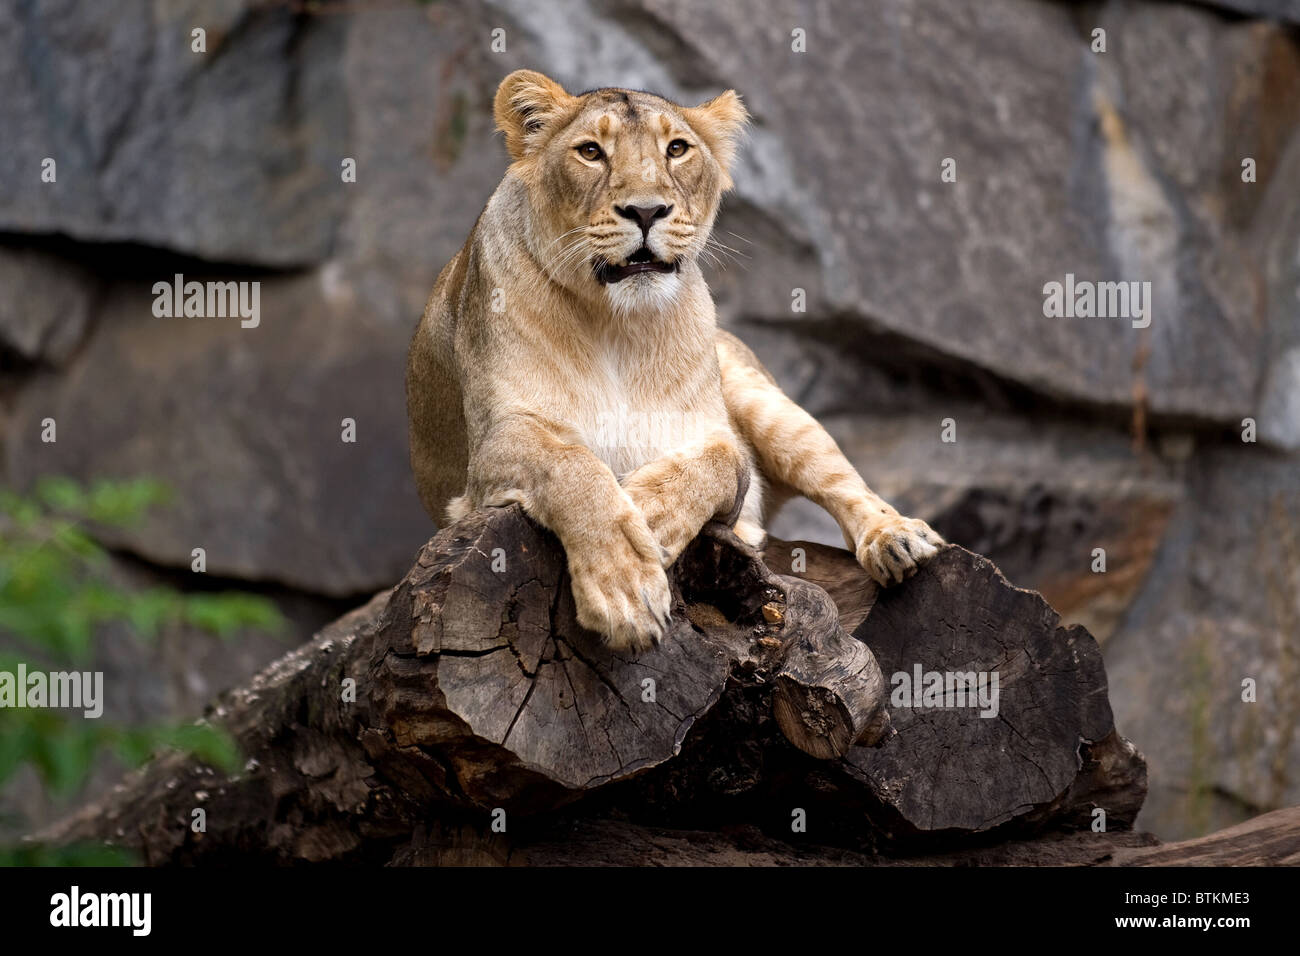 A female lion at the Berlin zoo Stock Photo